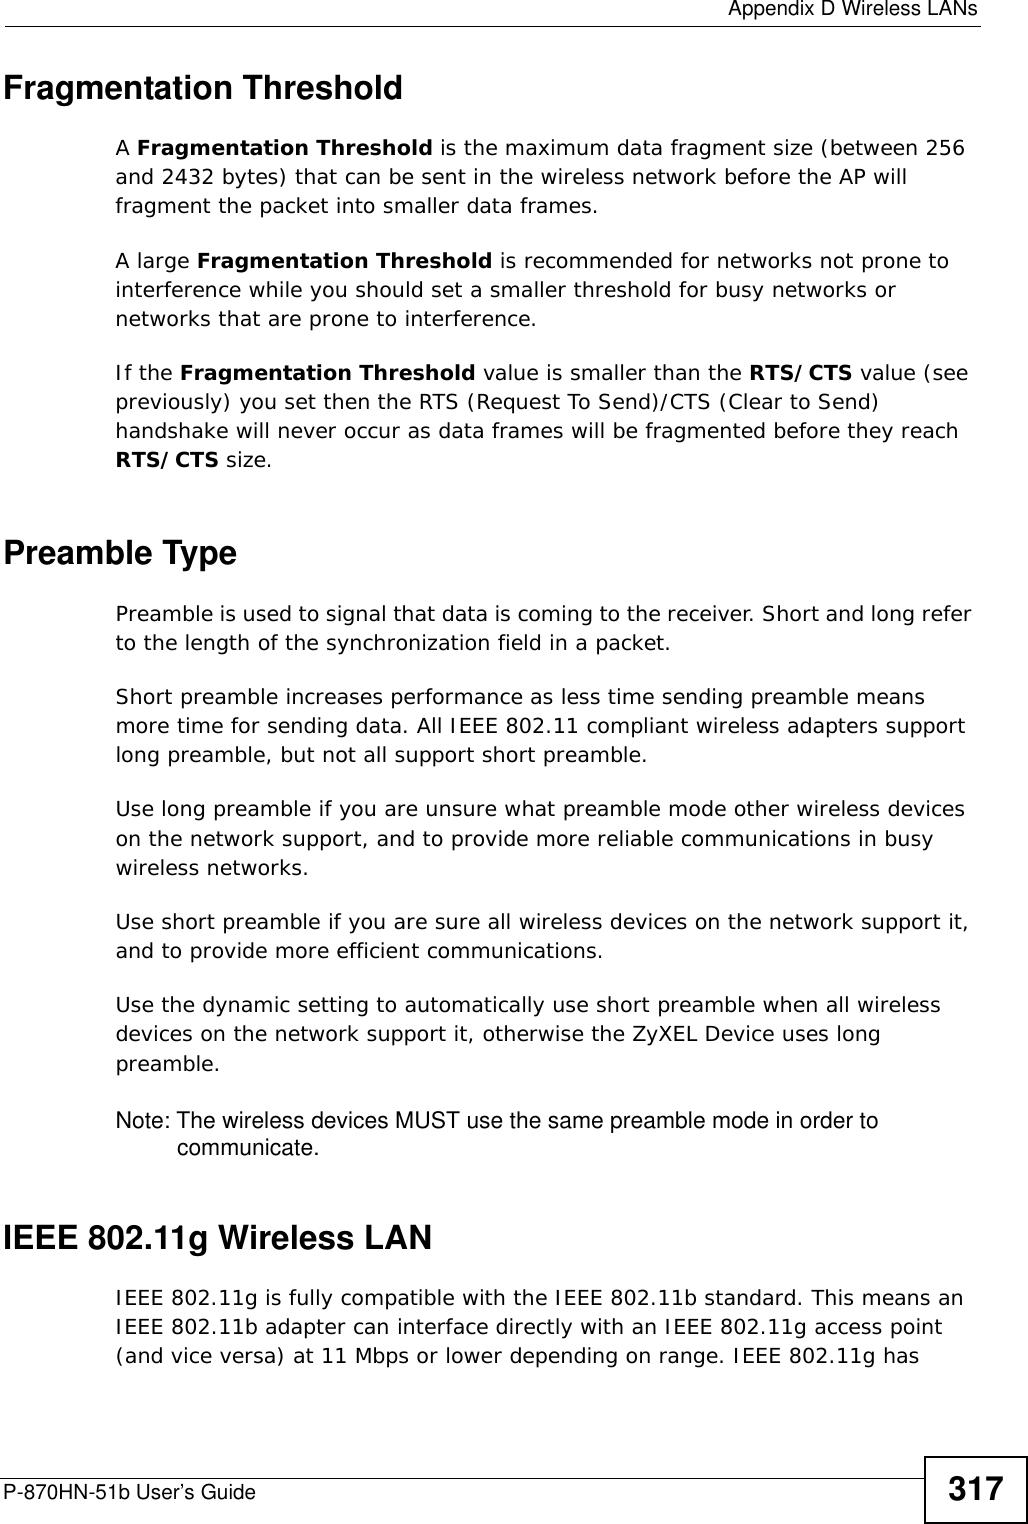  Appendix D Wireless LANsP-870HN-51b User’s Guide 317Fragmentation ThresholdA Fragmentation Threshold is the maximum data fragment size (between 256 and 2432 bytes) that can be sent in the wireless network before the AP will fragment the packet into smaller data frames.A large Fragmentation Threshold is recommended for networks not prone to interference while you should set a smaller threshold for busy networks or networks that are prone to interference.If the Fragmentation Threshold value is smaller than the RTS/CTS value (see previously) you set then the RTS (Request To Send)/CTS (Clear to Send) handshake will never occur as data frames will be fragmented before they reach RTS/CTS size.Preamble TypePreamble is used to signal that data is coming to the receiver. Short and long refer to the length of the synchronization field in a packet.Short preamble increases performance as less time sending preamble means more time for sending data. All IEEE 802.11 compliant wireless adapters support long preamble, but not all support short preamble. Use long preamble if you are unsure what preamble mode other wireless devices on the network support, and to provide more reliable communications in busy wireless networks. Use short preamble if you are sure all wireless devices on the network support it, and to provide more efficient communications.Use the dynamic setting to automatically use short preamble when all wireless devices on the network support it, otherwise the ZyXEL Device uses long preamble.Note: The wireless devices MUST use the same preamble mode in order to communicate.IEEE 802.11g Wireless LANIEEE 802.11g is fully compatible with the IEEE 802.11b standard. This means an IEEE 802.11b adapter can interface directly with an IEEE 802.11g access point (and vice versa) at 11 Mbps or lower depending on range. IEEE 802.11g has 